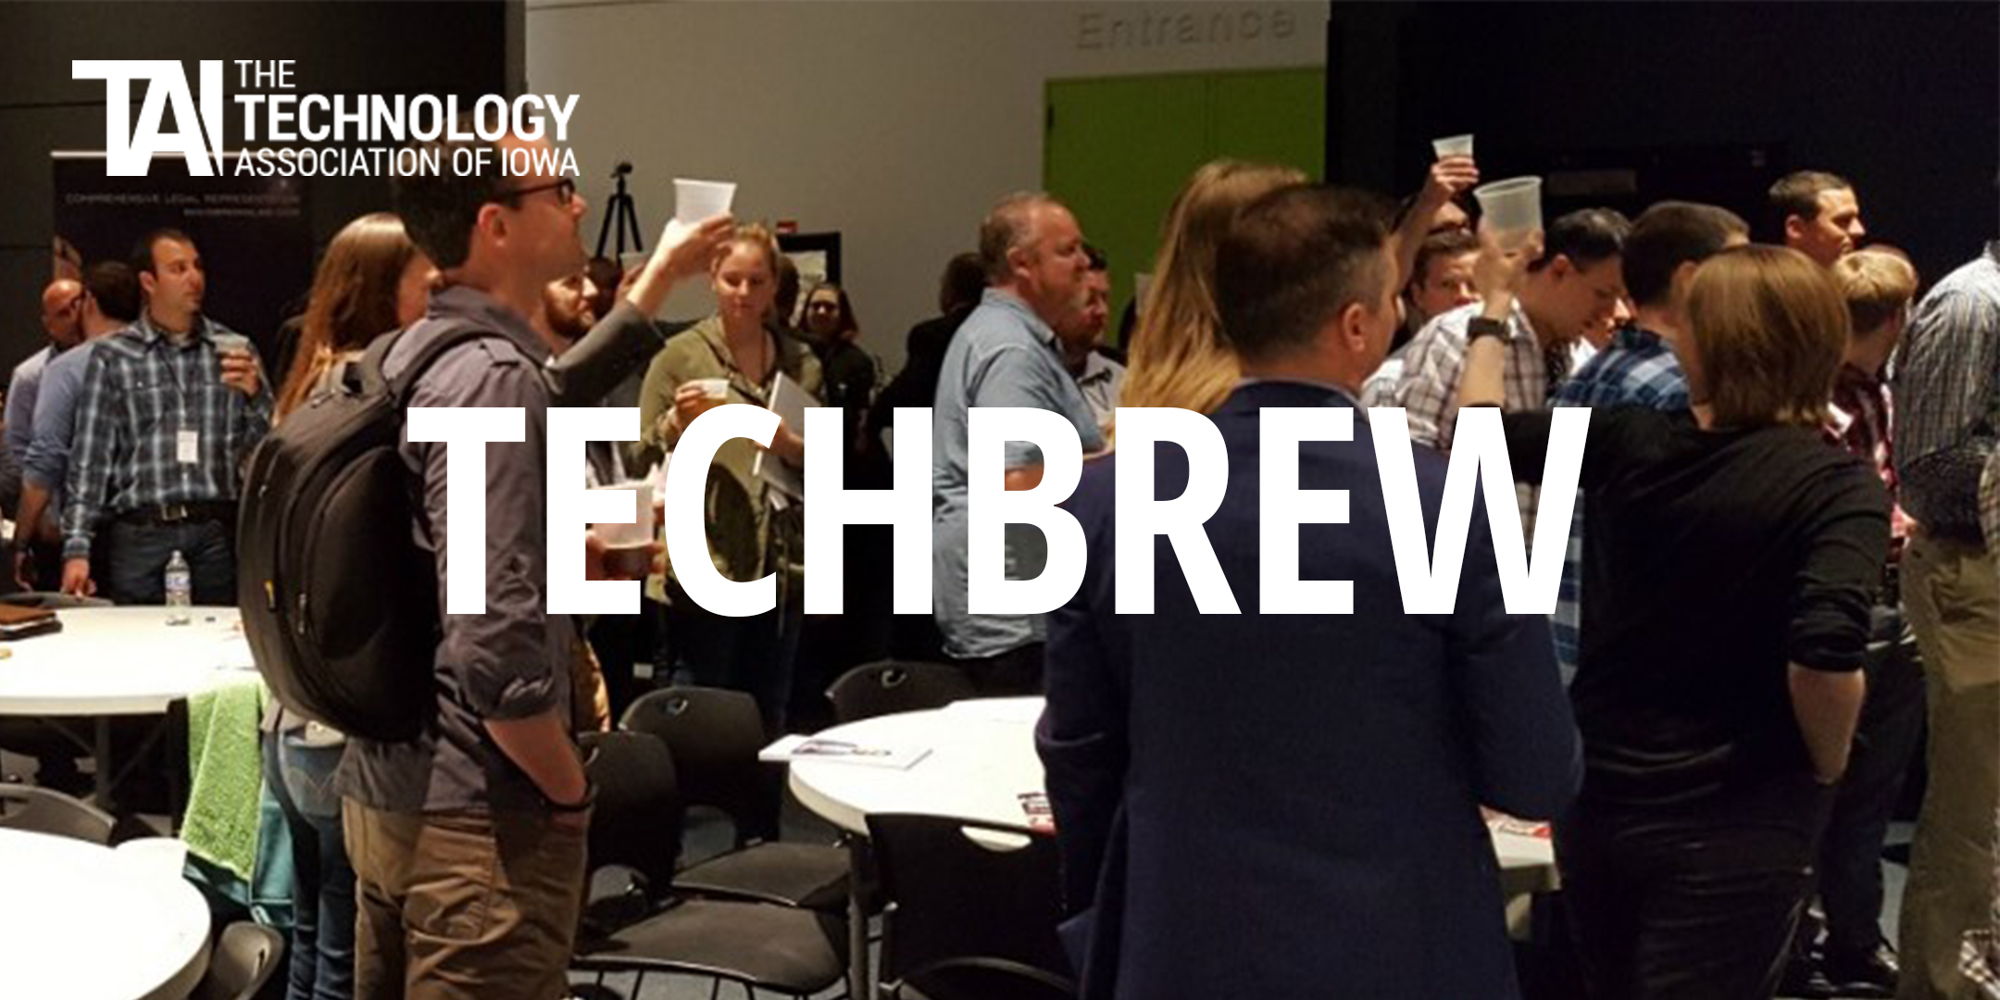 TechBrew promotional image